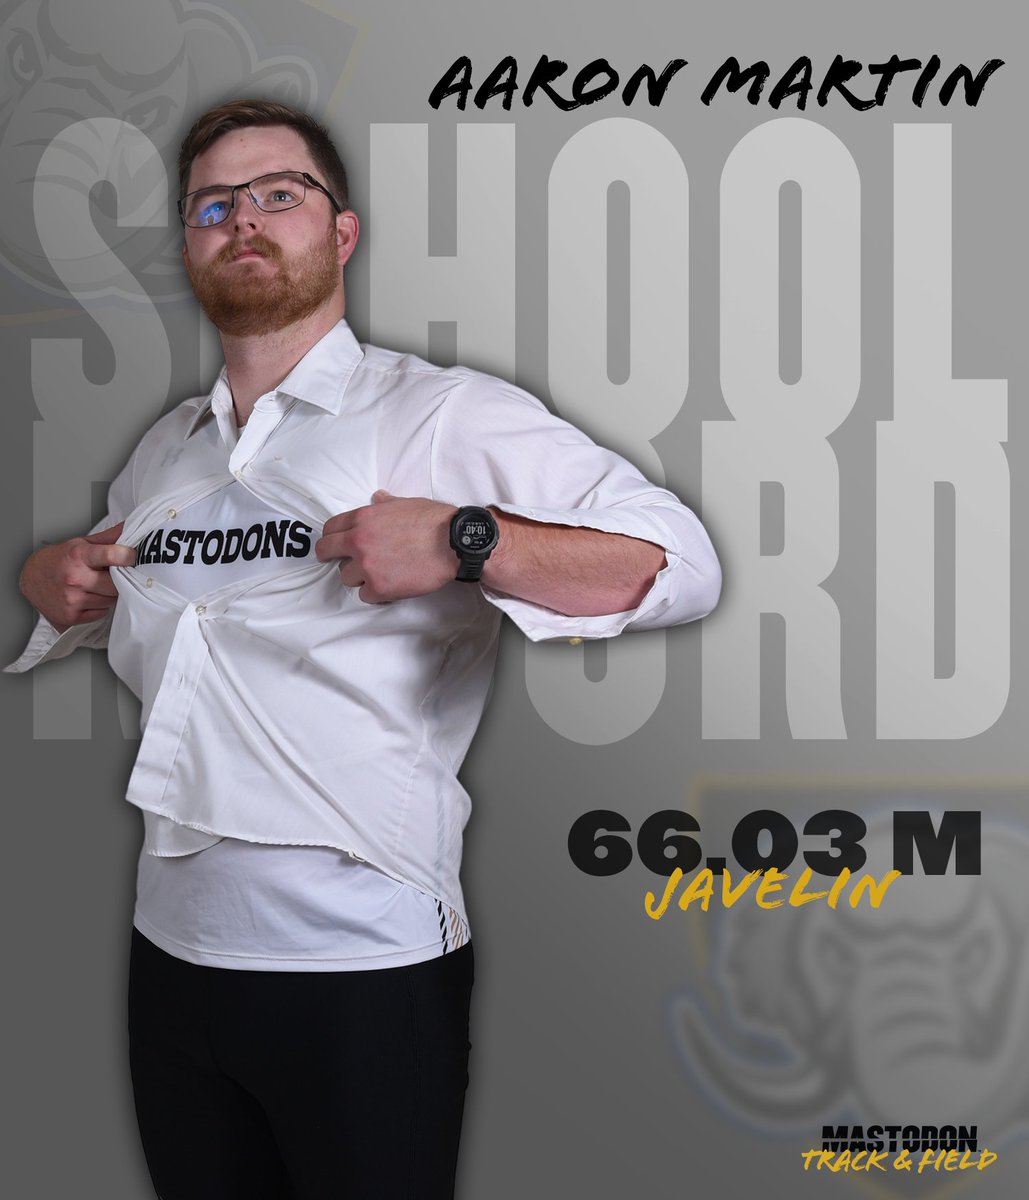 Javelin school record for Aaron Martin!

#FeelTheRumble #HLTF